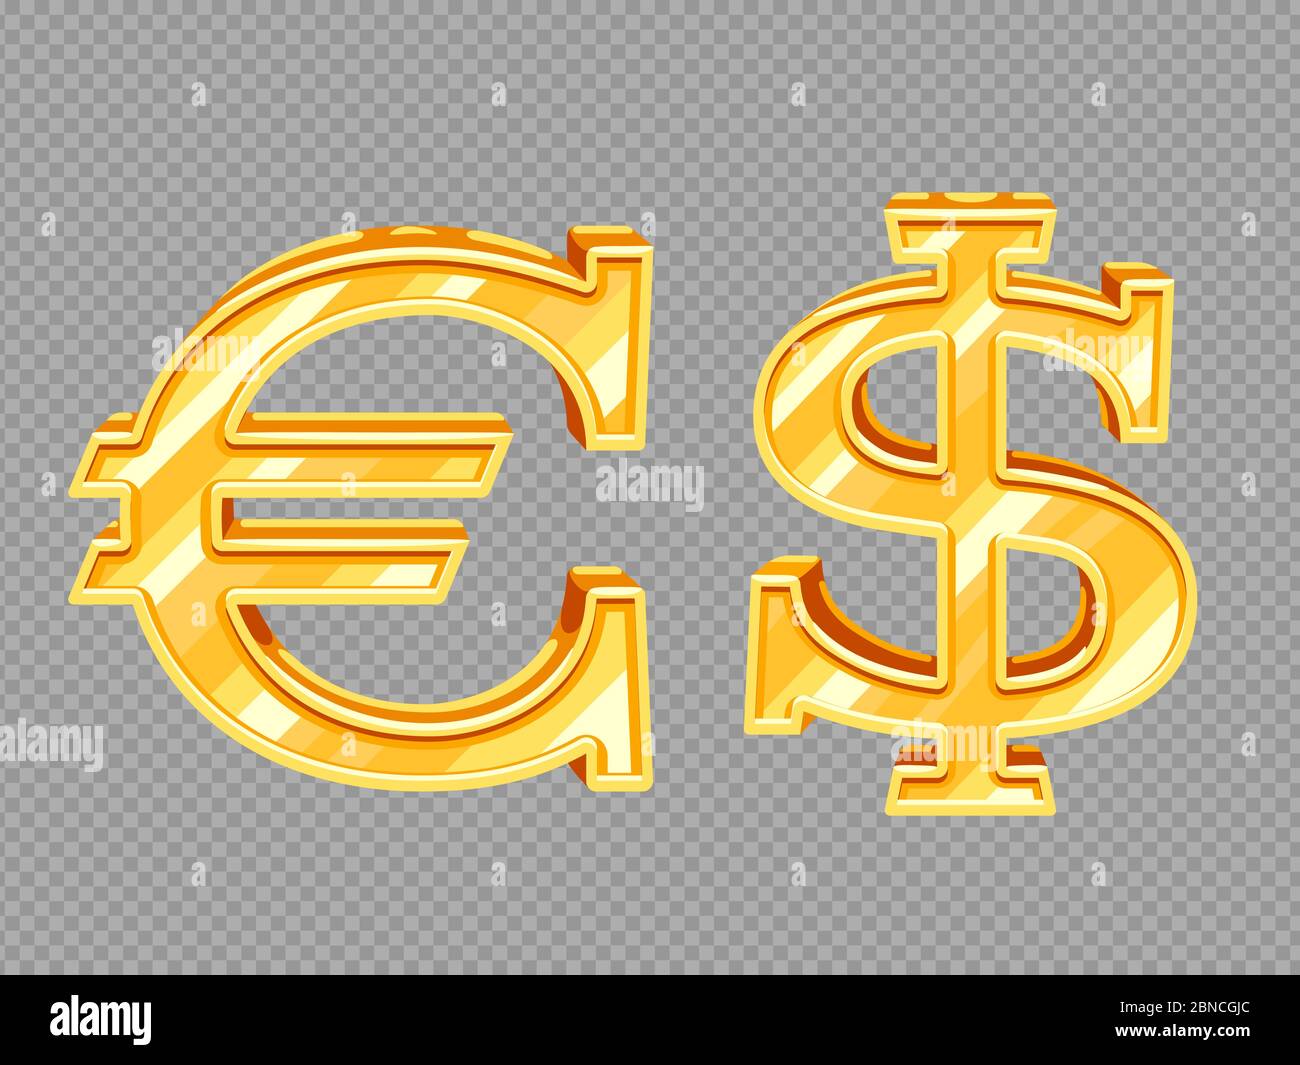 Golden vector dollar and euro signs isolated on transparent background. Illustration of euro and dollar gold symbols Stock Vector